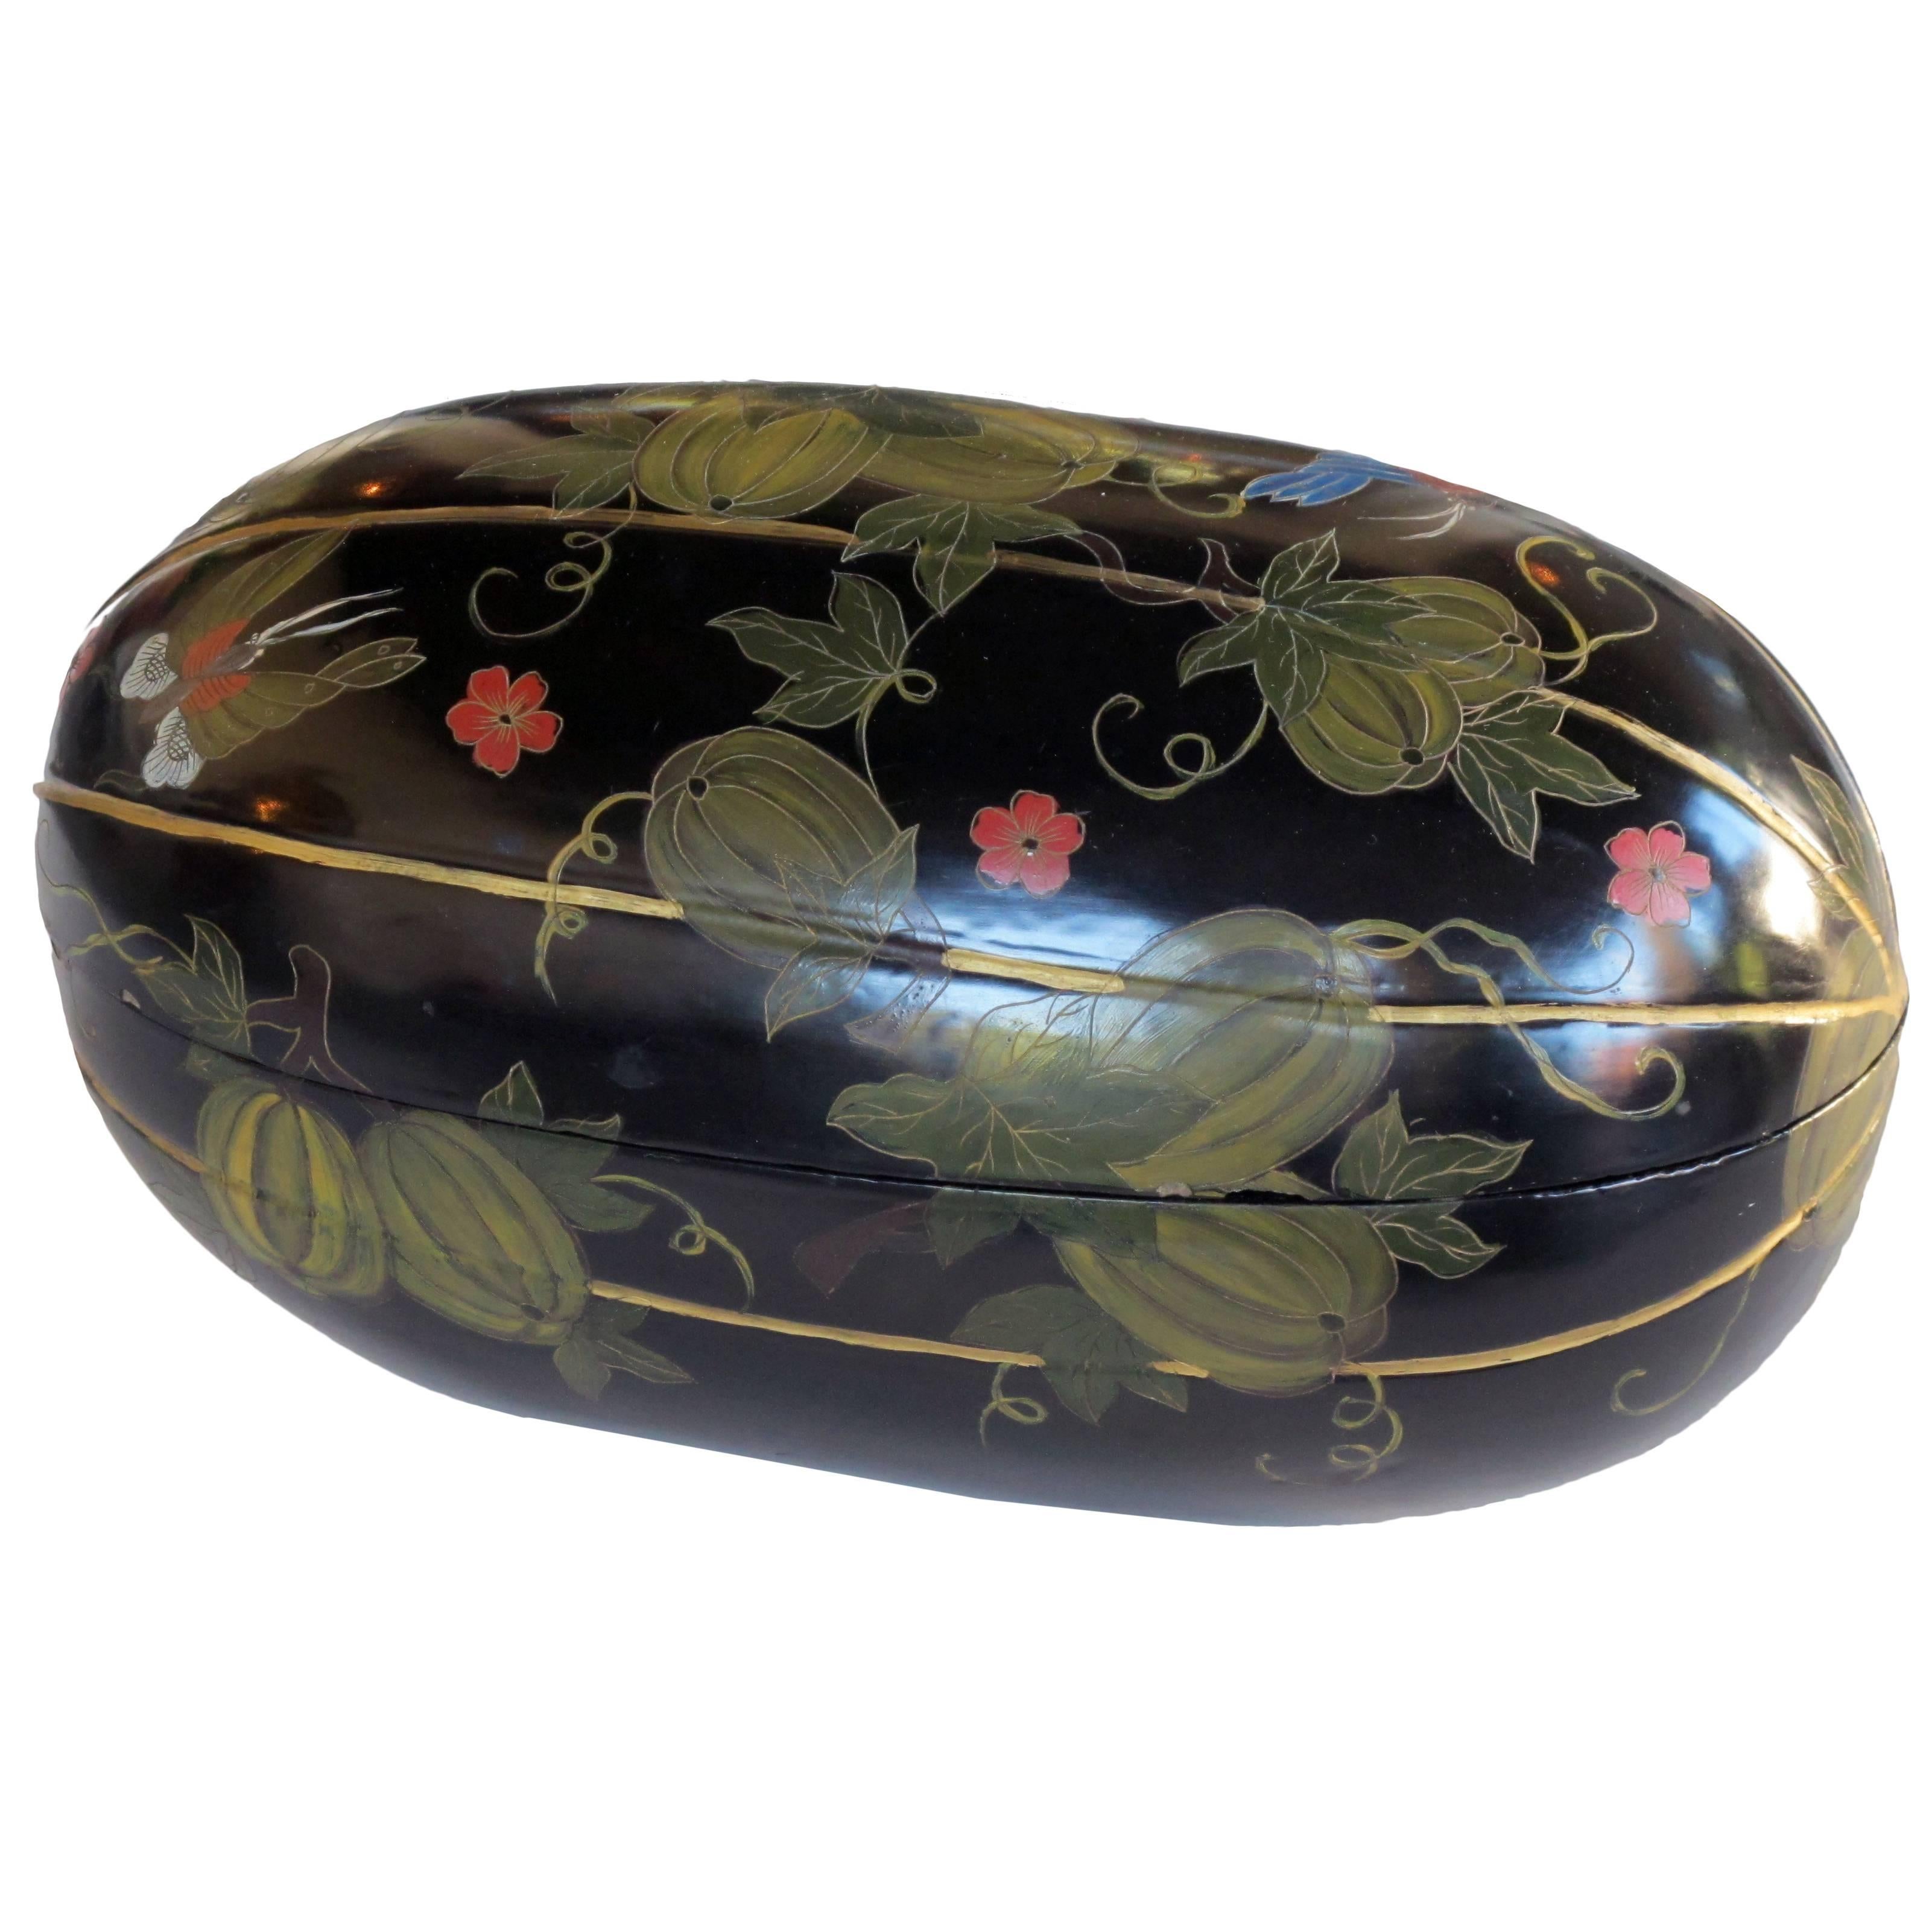 Delightful Japanese Black Lacquered Gourd-Form Box